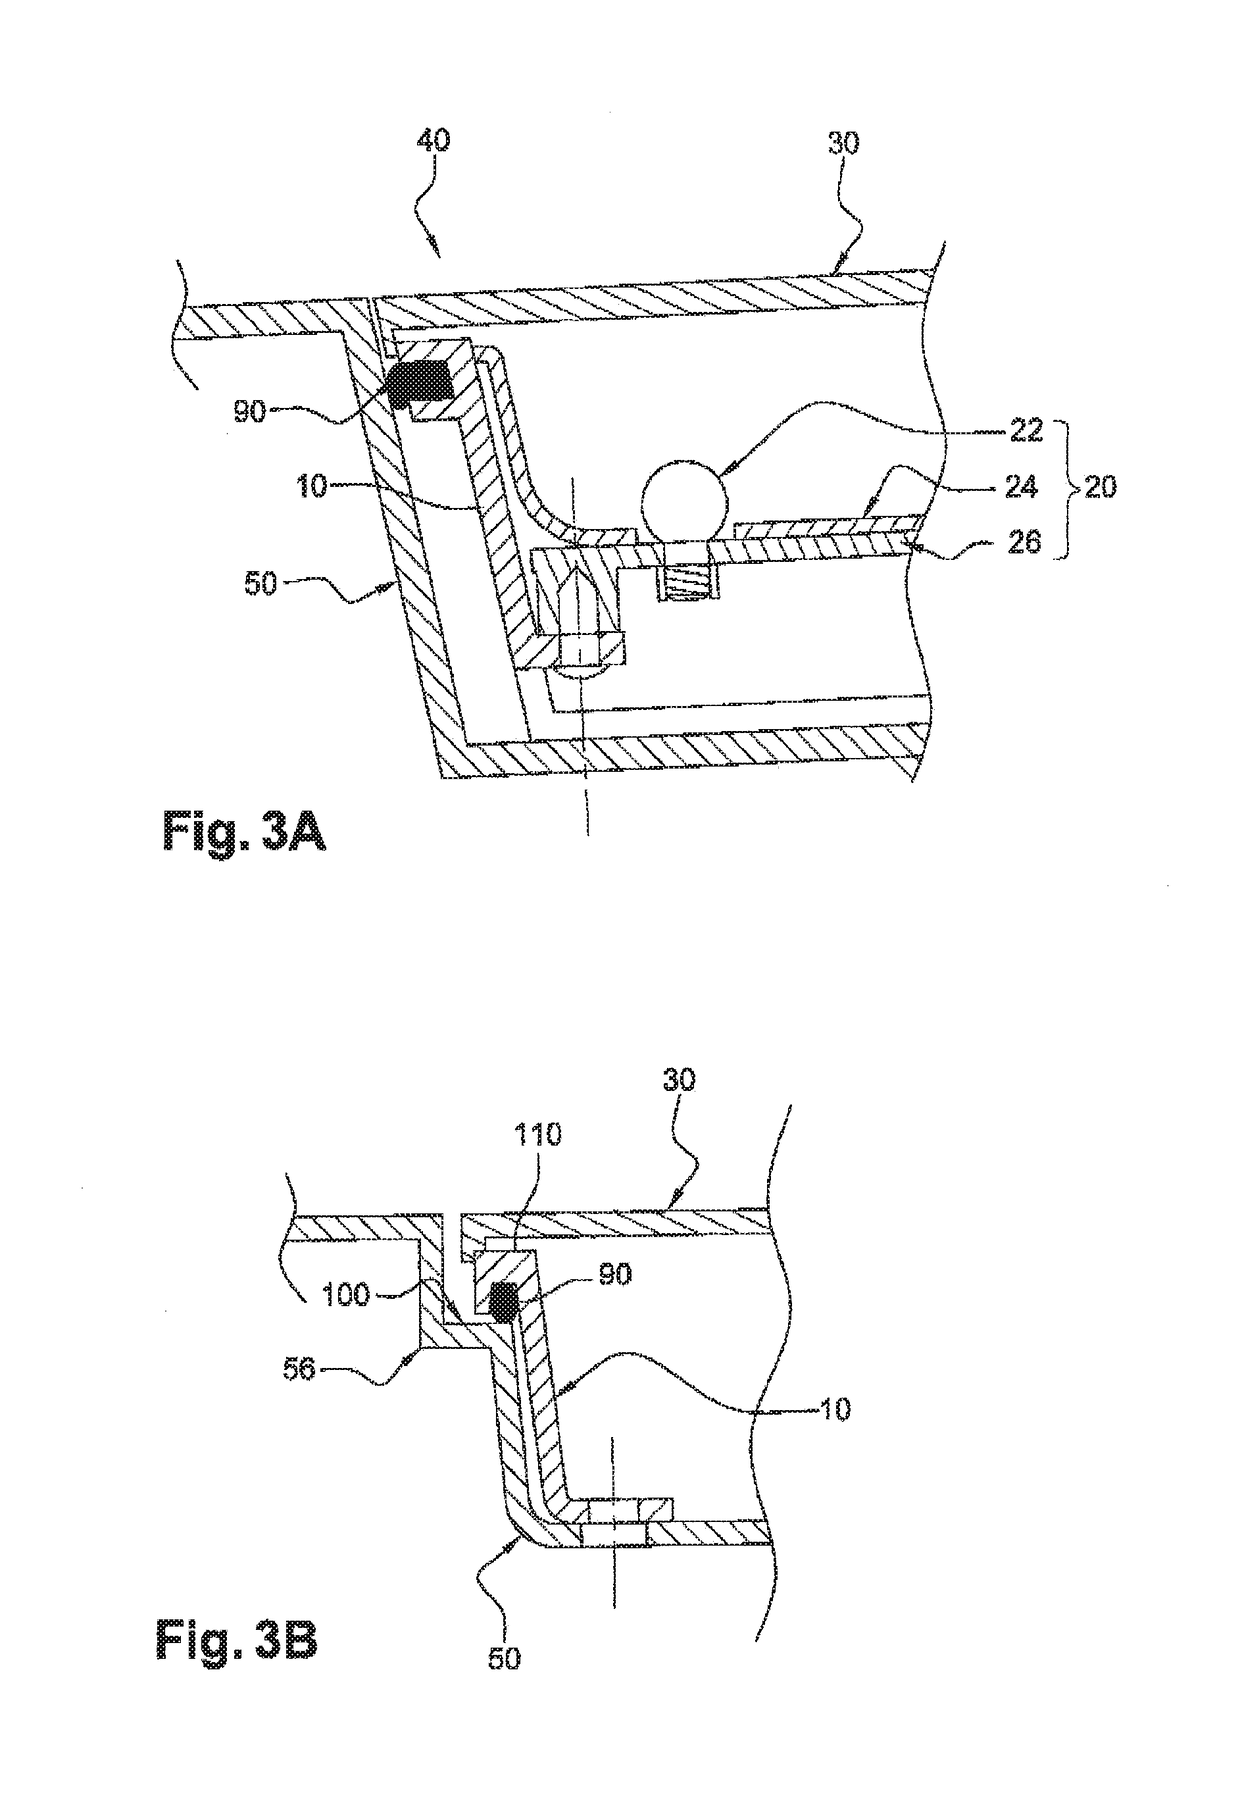 Optical Casing Having A Reduced Weight For A Motor Vehicle, Optical Module, And Vehicle Body Part